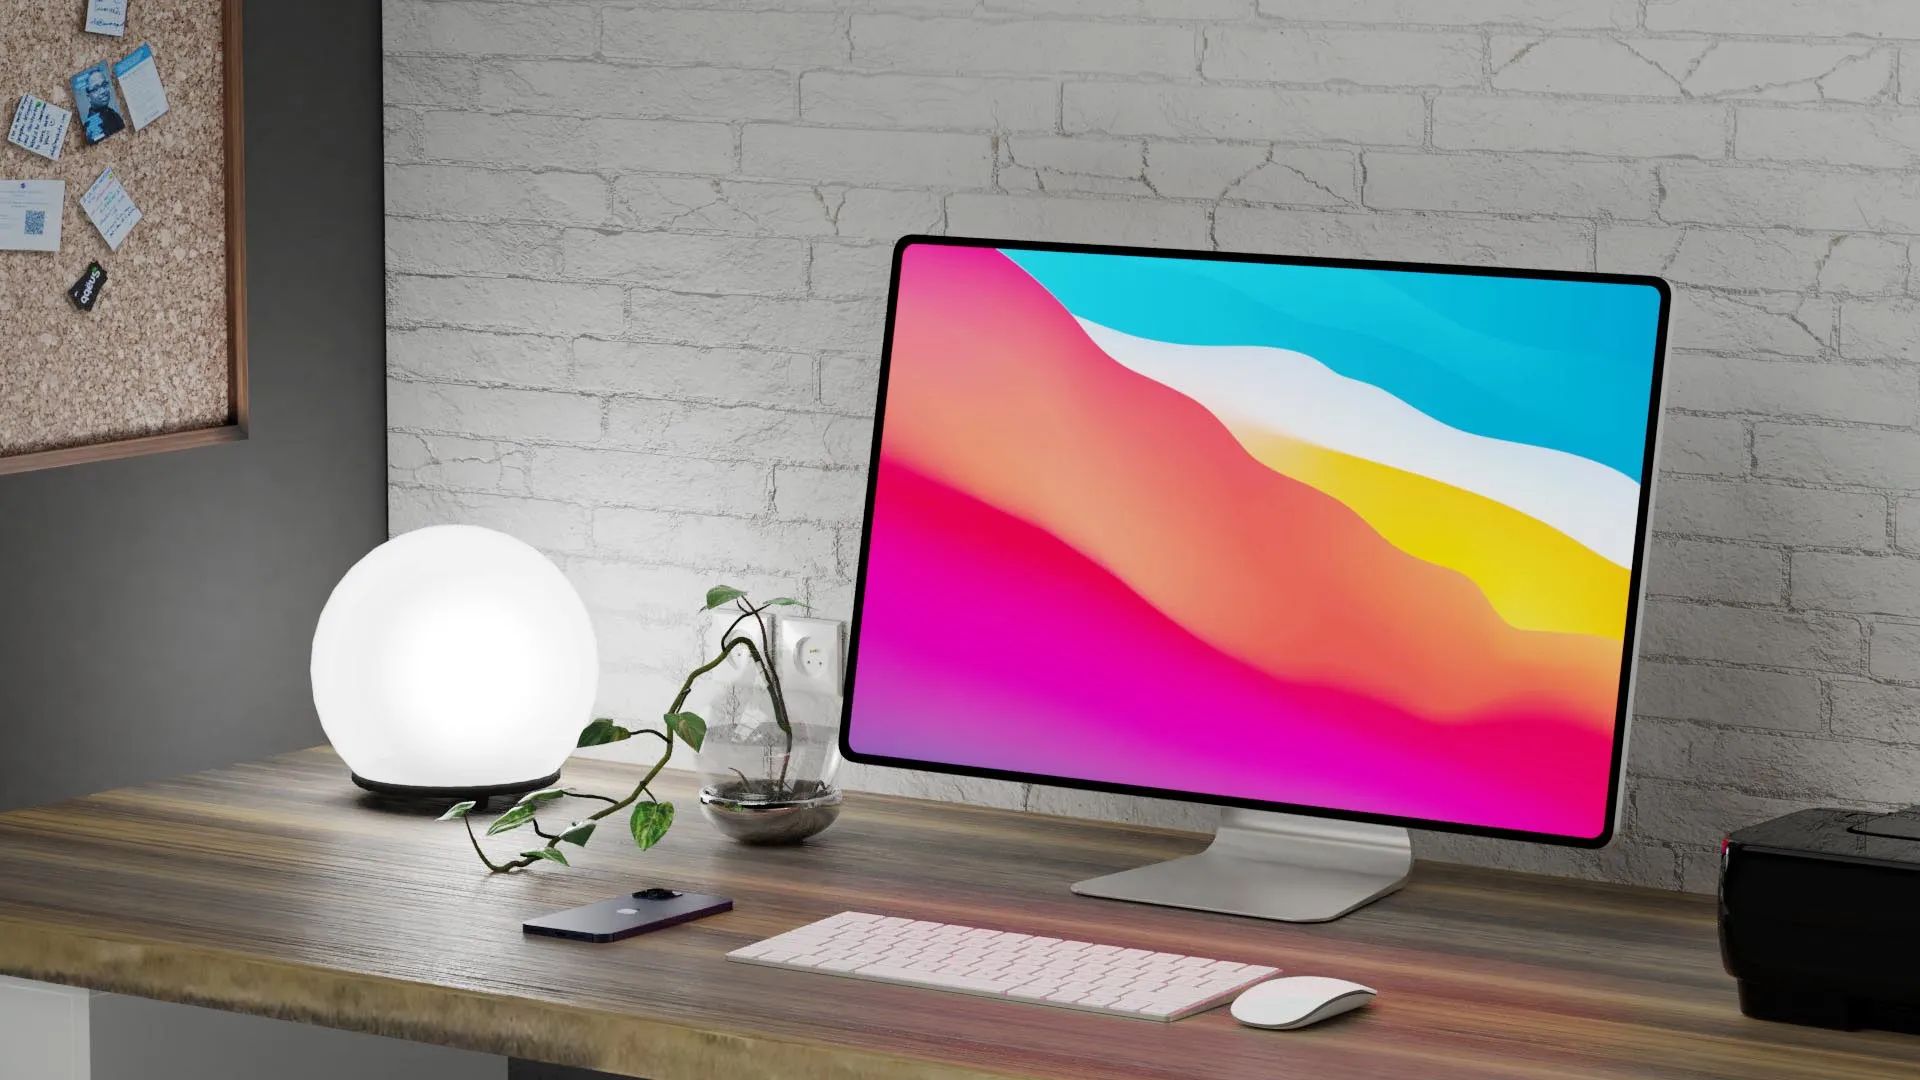 In this article, we are going to be going over the rumors about iMac 27-inch, its release date, price, and more.